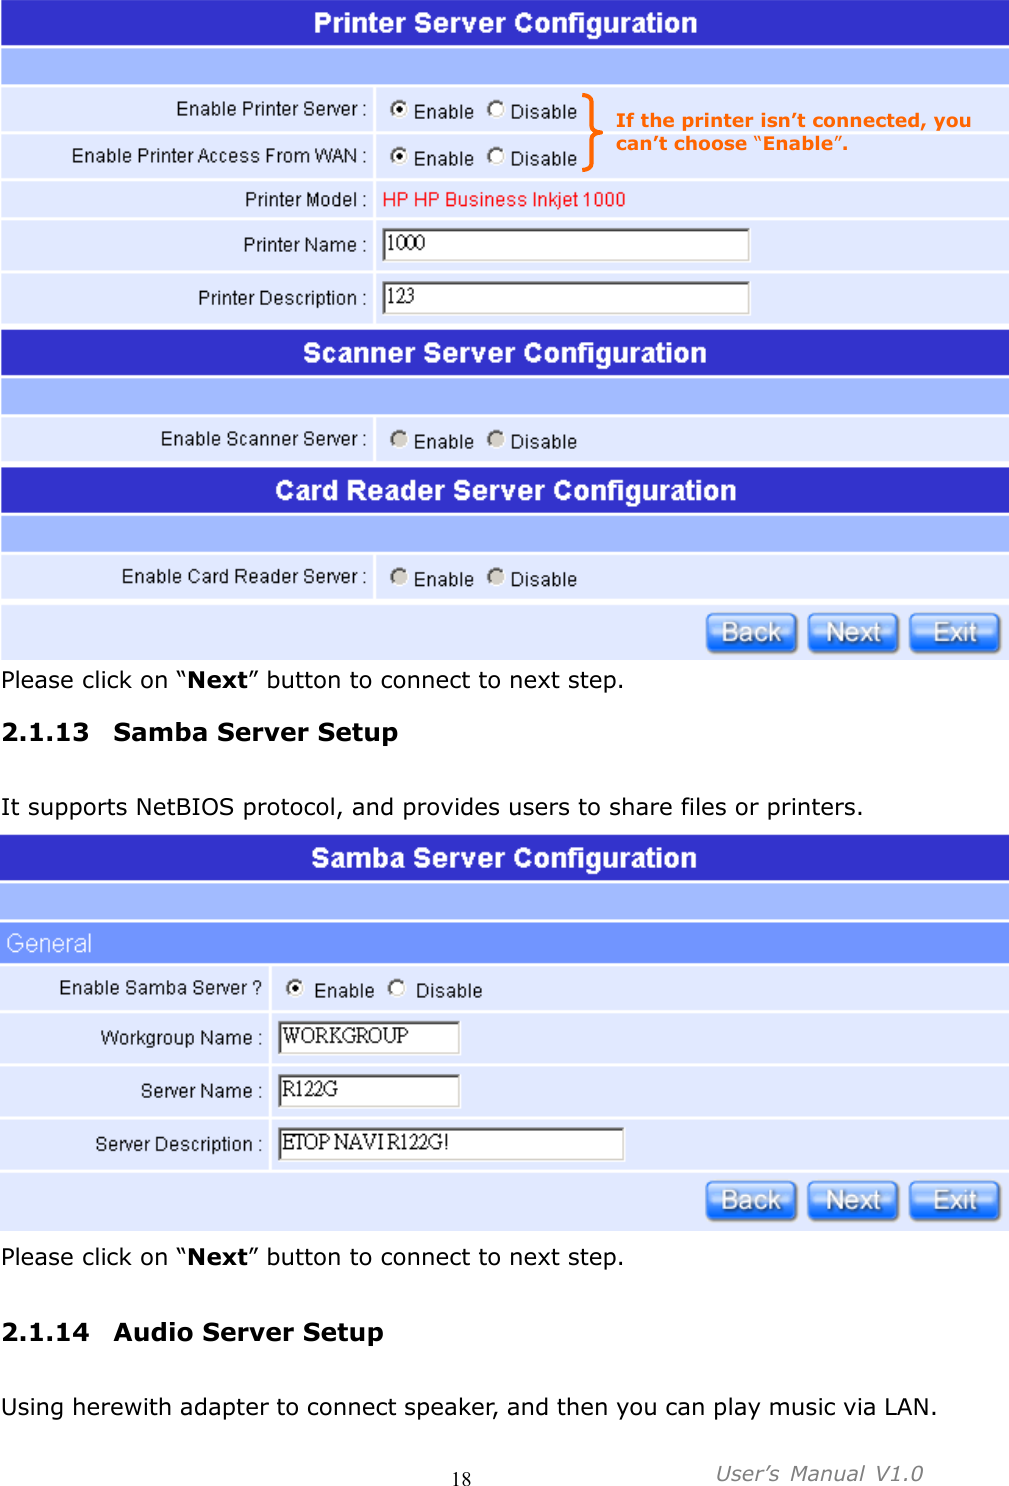                                     18           User’s  Manual  V1.0   Please click on “Next” button to connect to next step. 2.1.13 Samba Server Setup  It supports NetBIOS protocol, and provides users to share files or printers.    Please click on “Next” button to connect to next step.  2.1.14 Audio Server Setup  Using herewith adapter to connect speaker, and then you can play music via LAN. If the printer isn’t connected, you can’t choose “Enable”. 